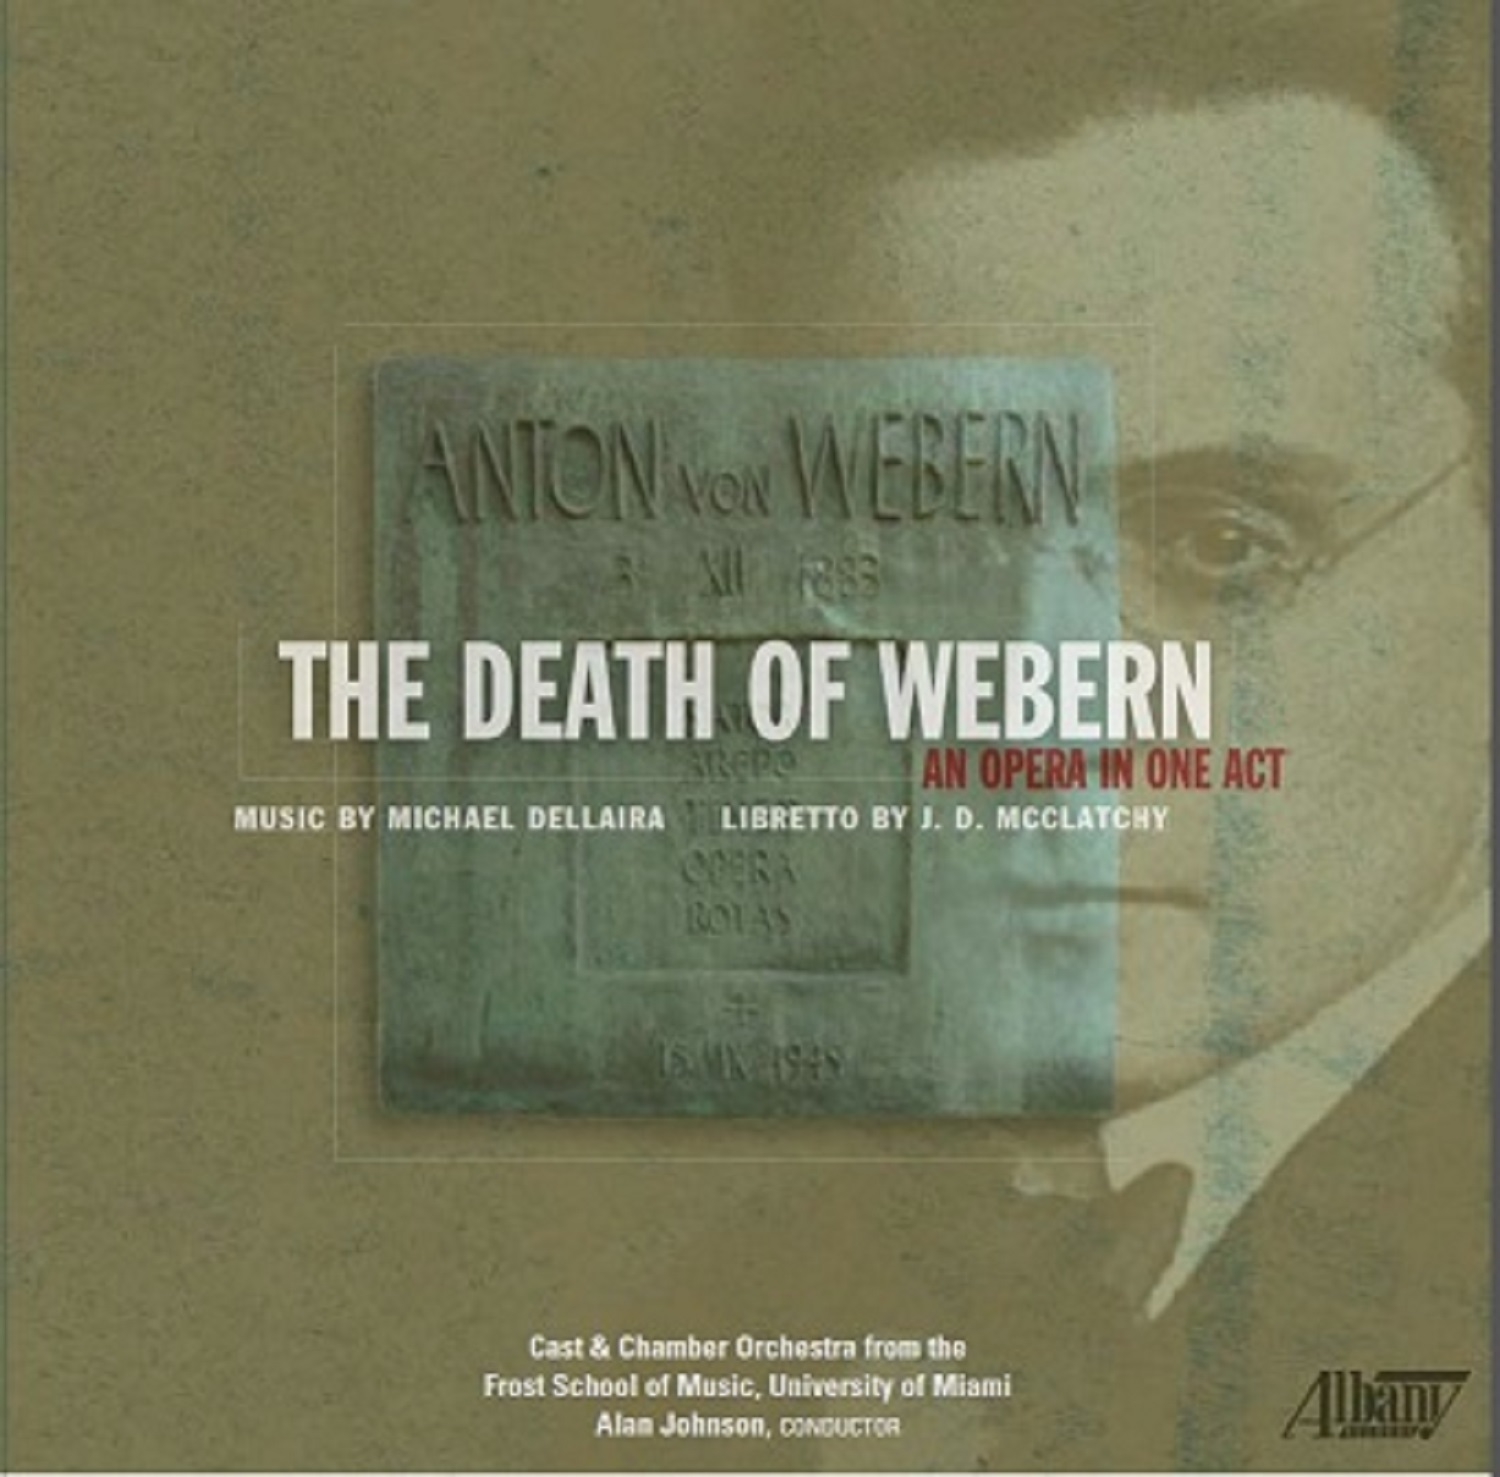 thedeathofweberncover.jpg